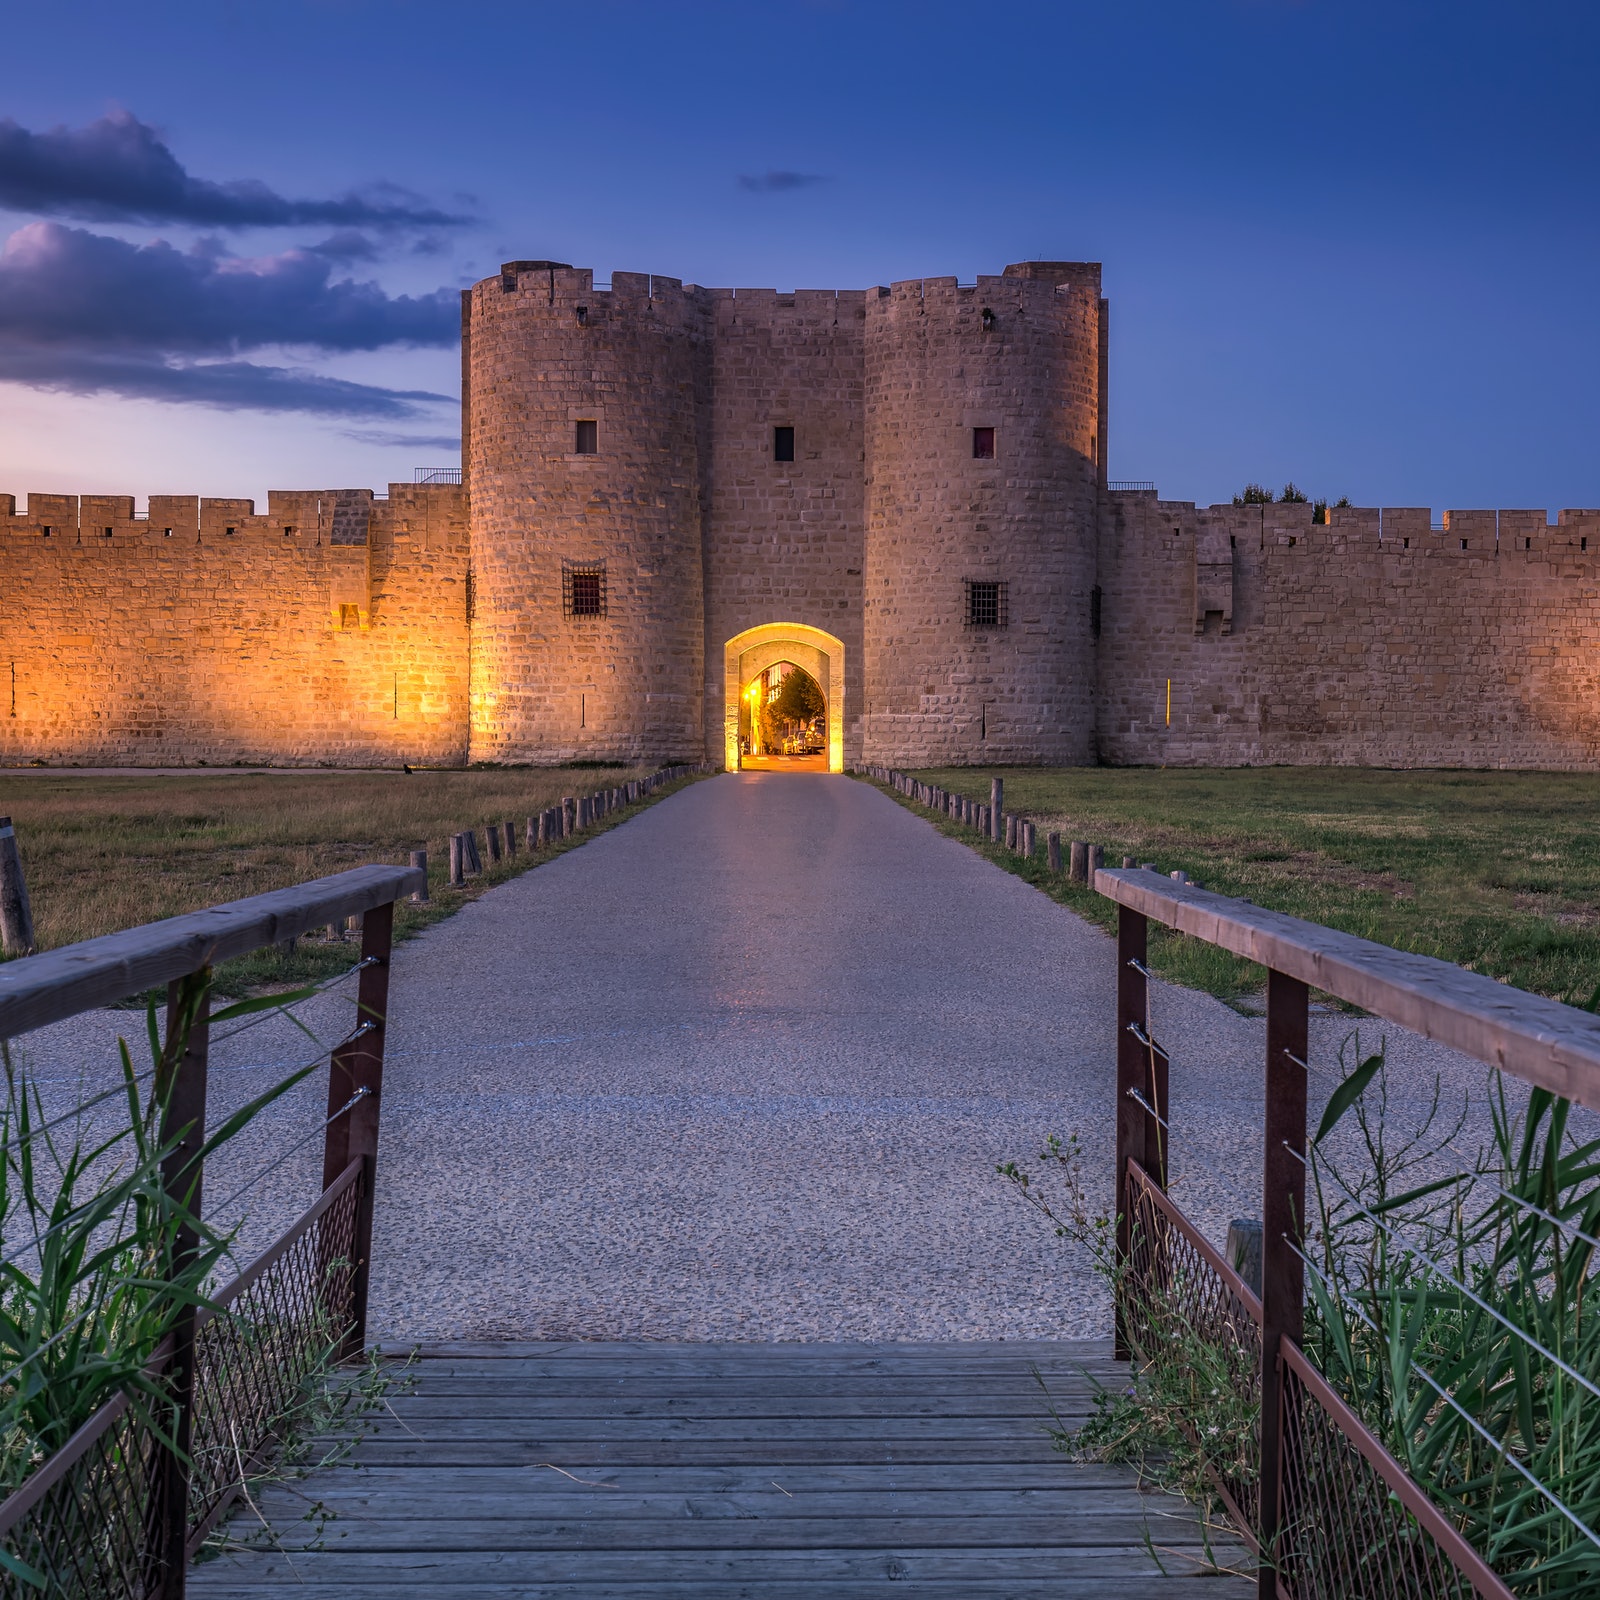 Towers and Ramparts of Aigues-Mortes in France